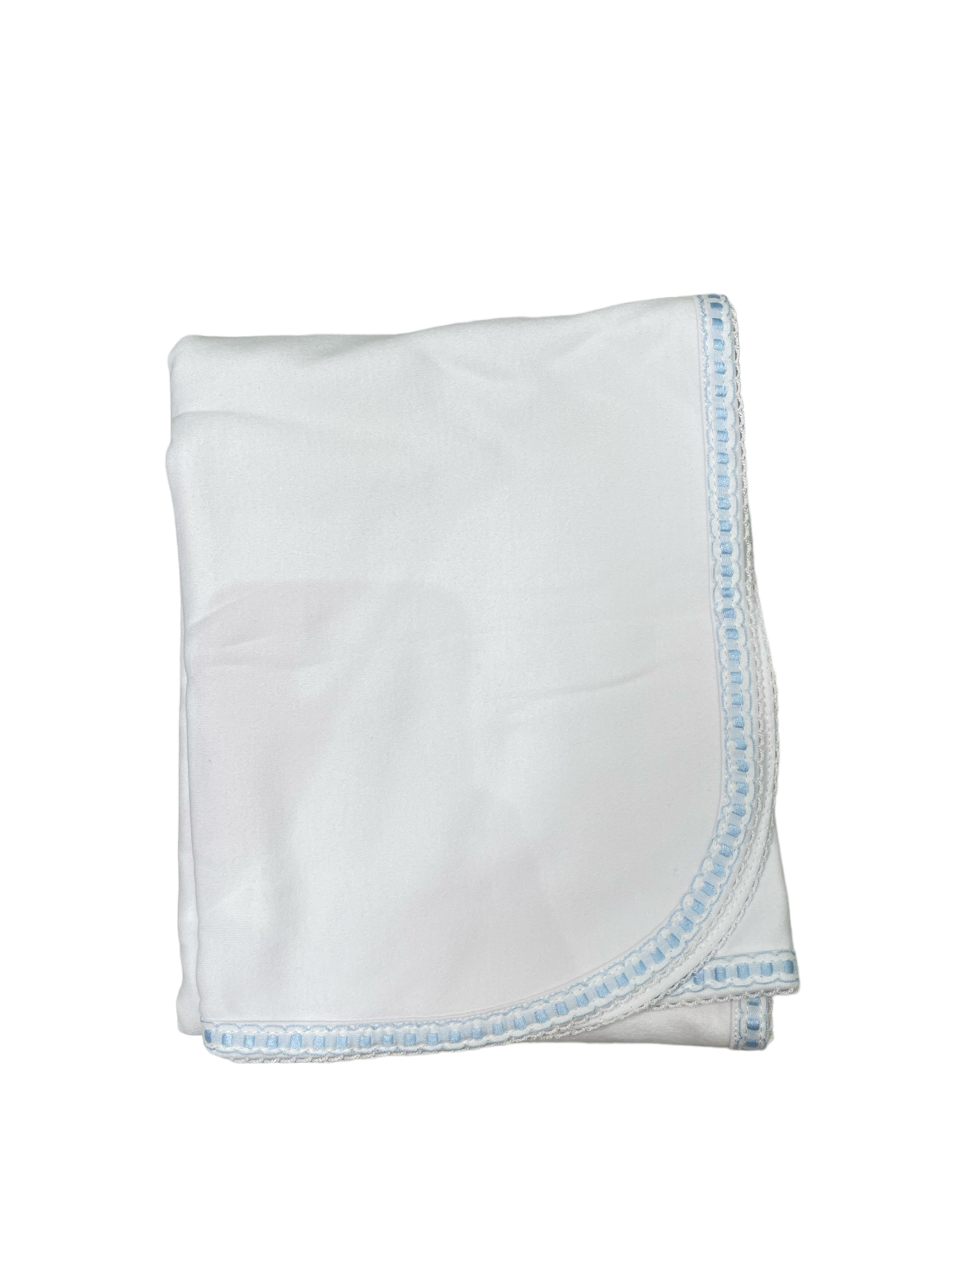 White With Light Blue Trim Take Me Home Blanket